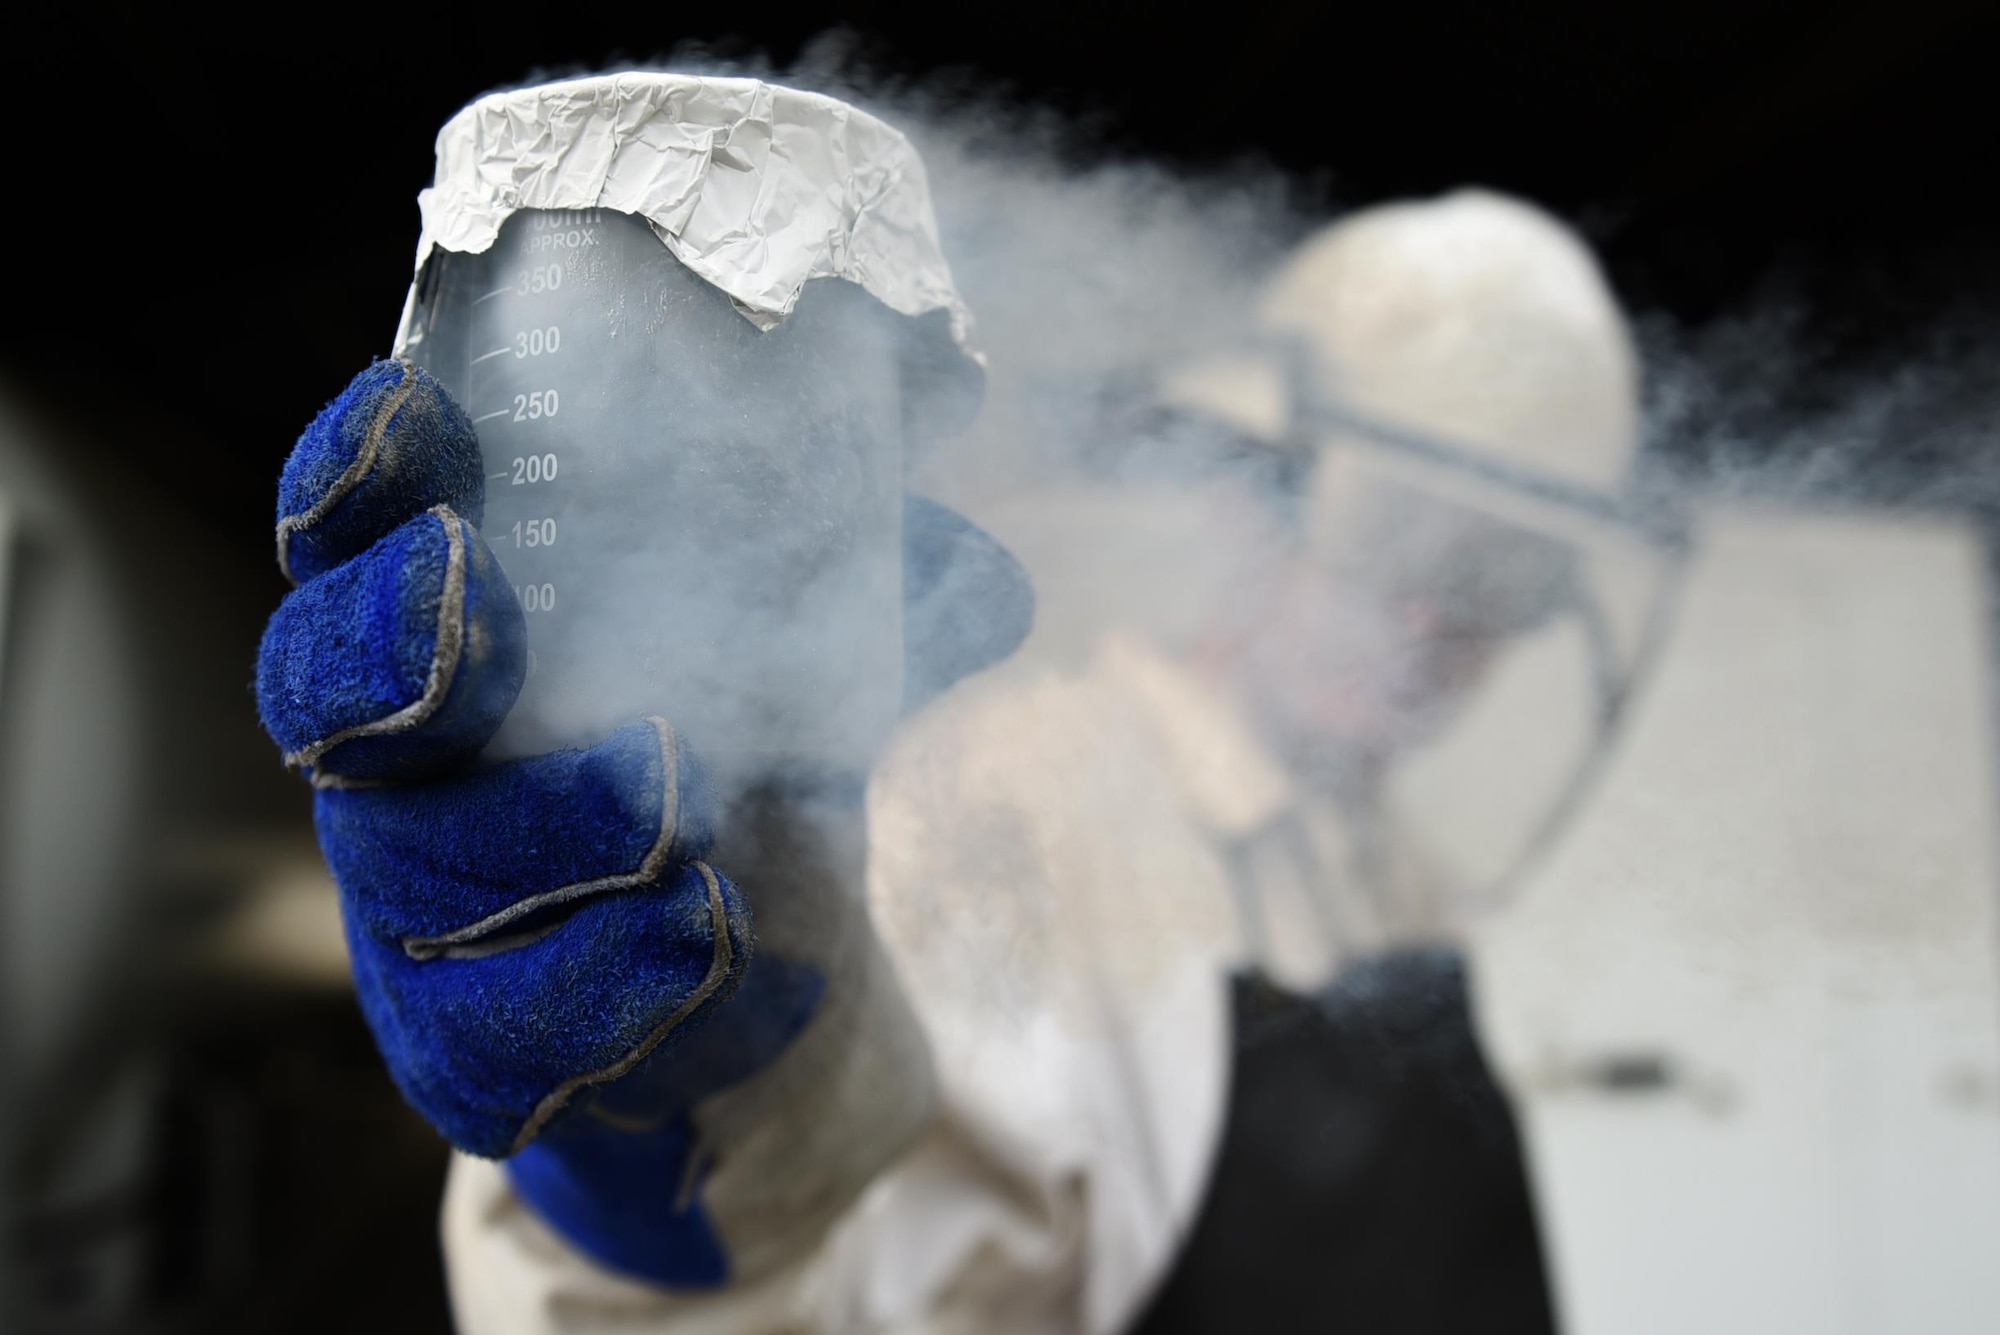 U.S. Air Force Senior Airman Jesse Frady, 19th Logistics Readiness Squadron fuel cryogenics journeyman, takes a sample of liquid oxygen, or LOX, for odor testing March, 28, 2017, at Little Rock Air Force Base, Ark. Before the oxygen makes its way to pilots, Frady uses an odor sample beaker with filter paper to test for contamination. (U.S. Air Force photo by Airman 1st Class Kevin Sommer Giron)